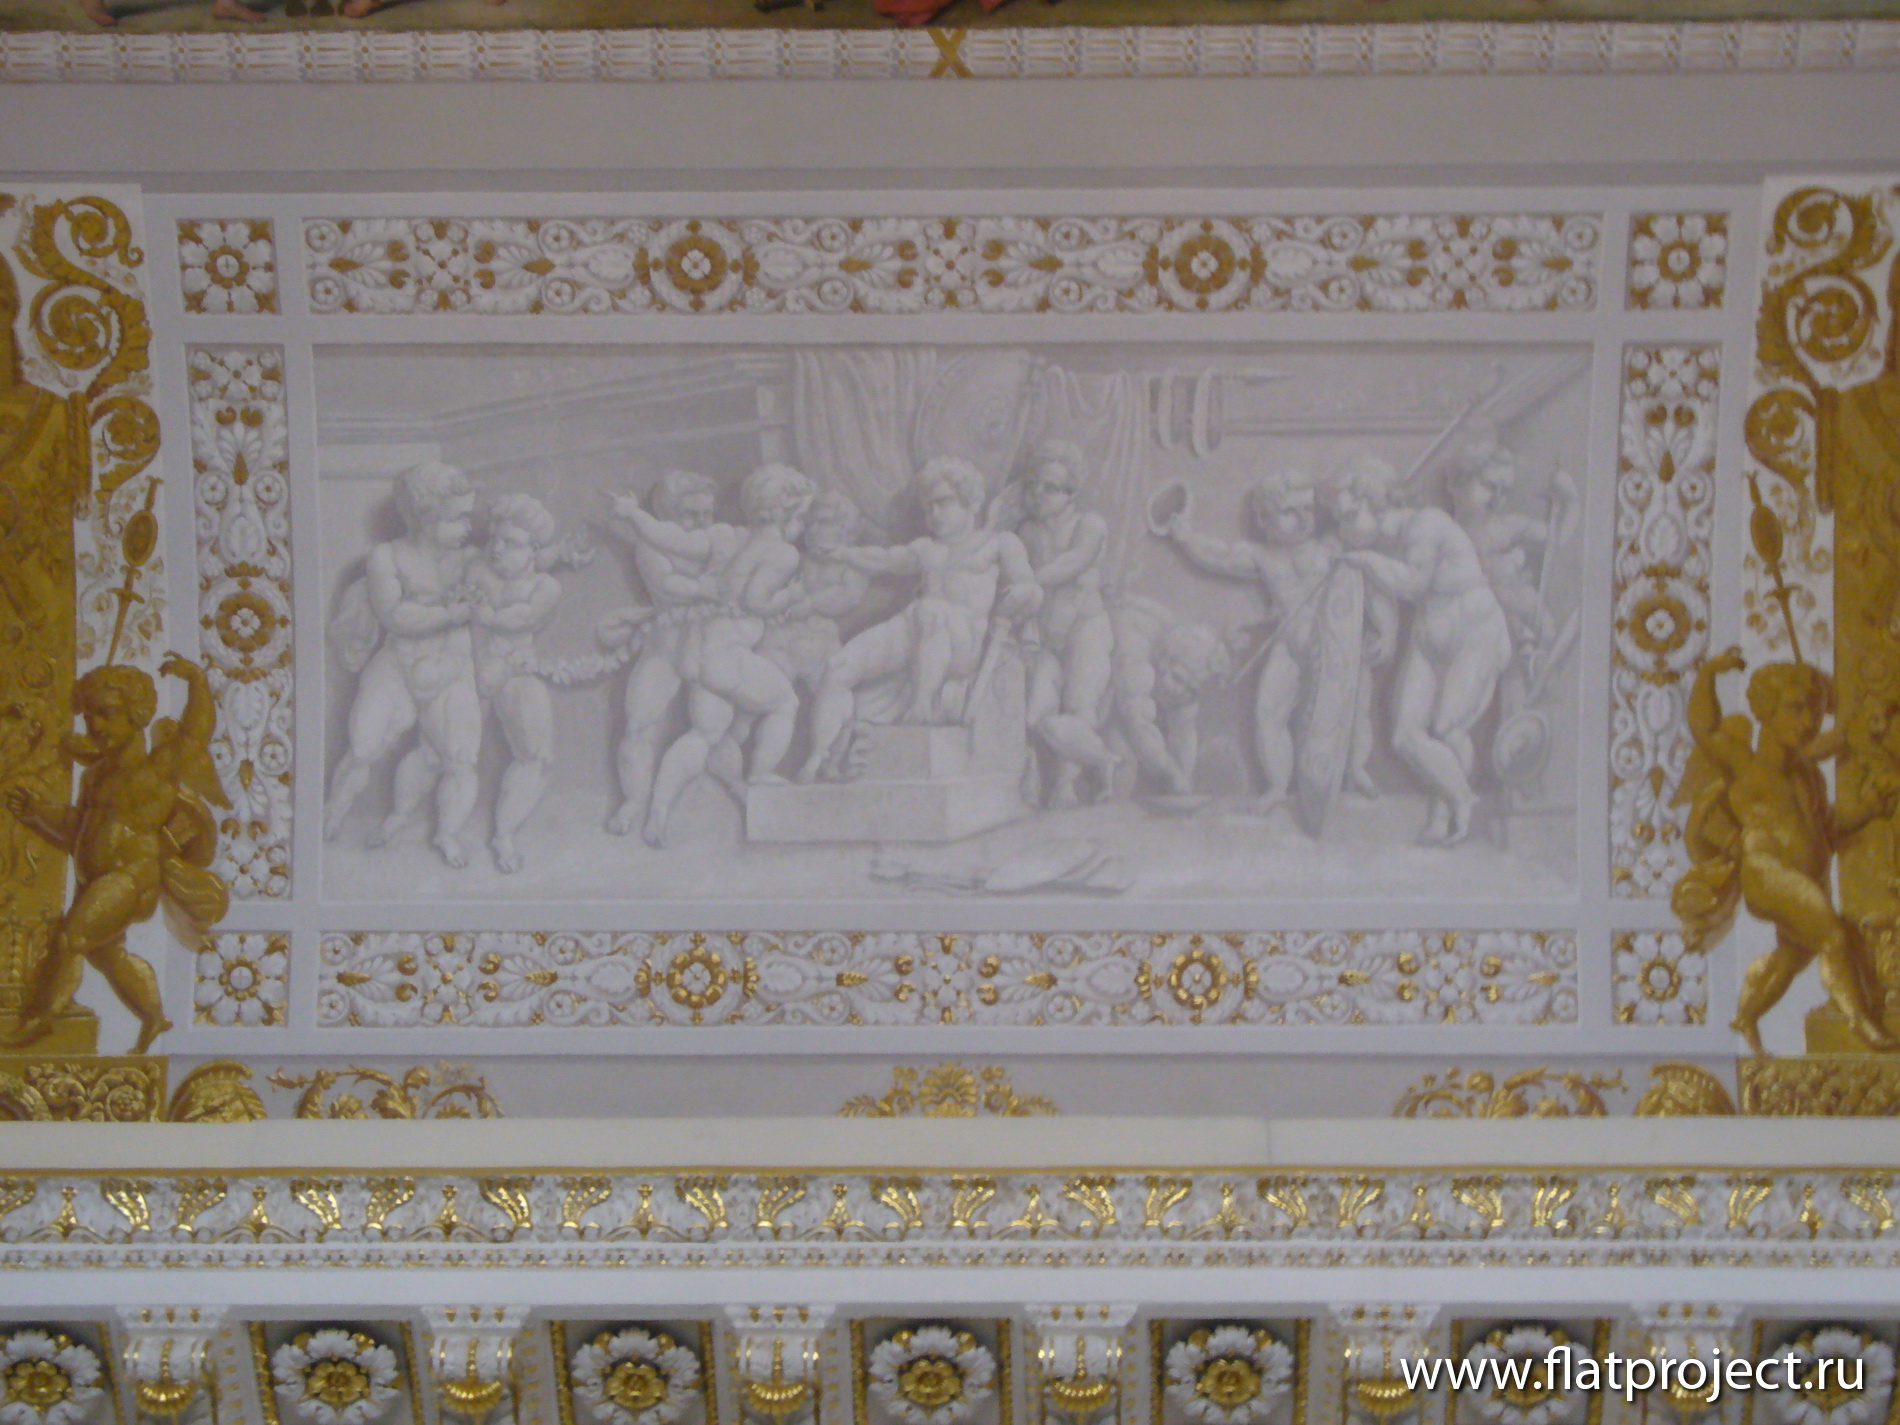 The State Russian museum interiors – photo 89